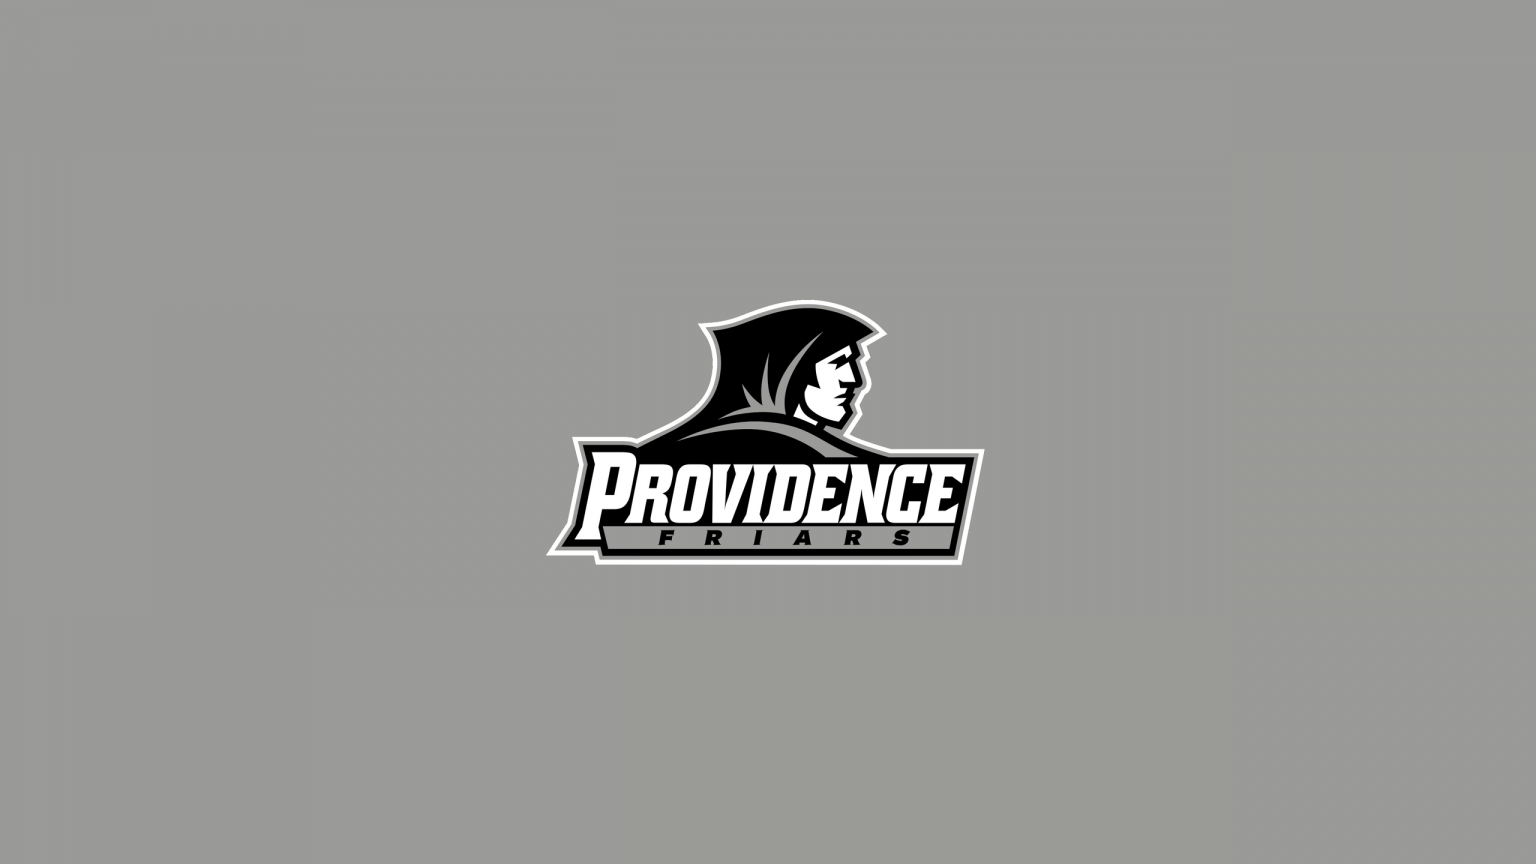 Providence Friars Basketball - NCAAB - Square Bettor